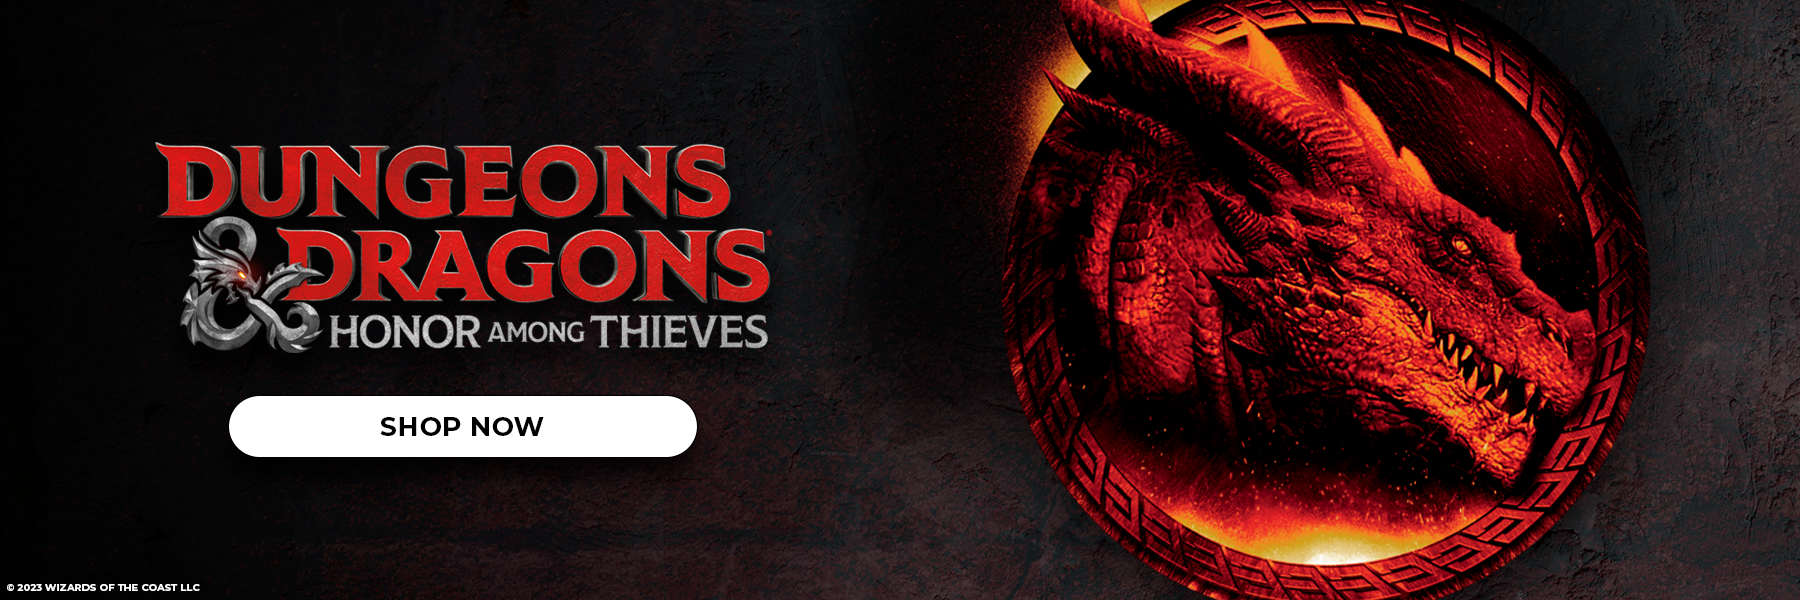 Dungeons & Dragons: Honor Among Thieves. Shop now. Graphic of a dragon